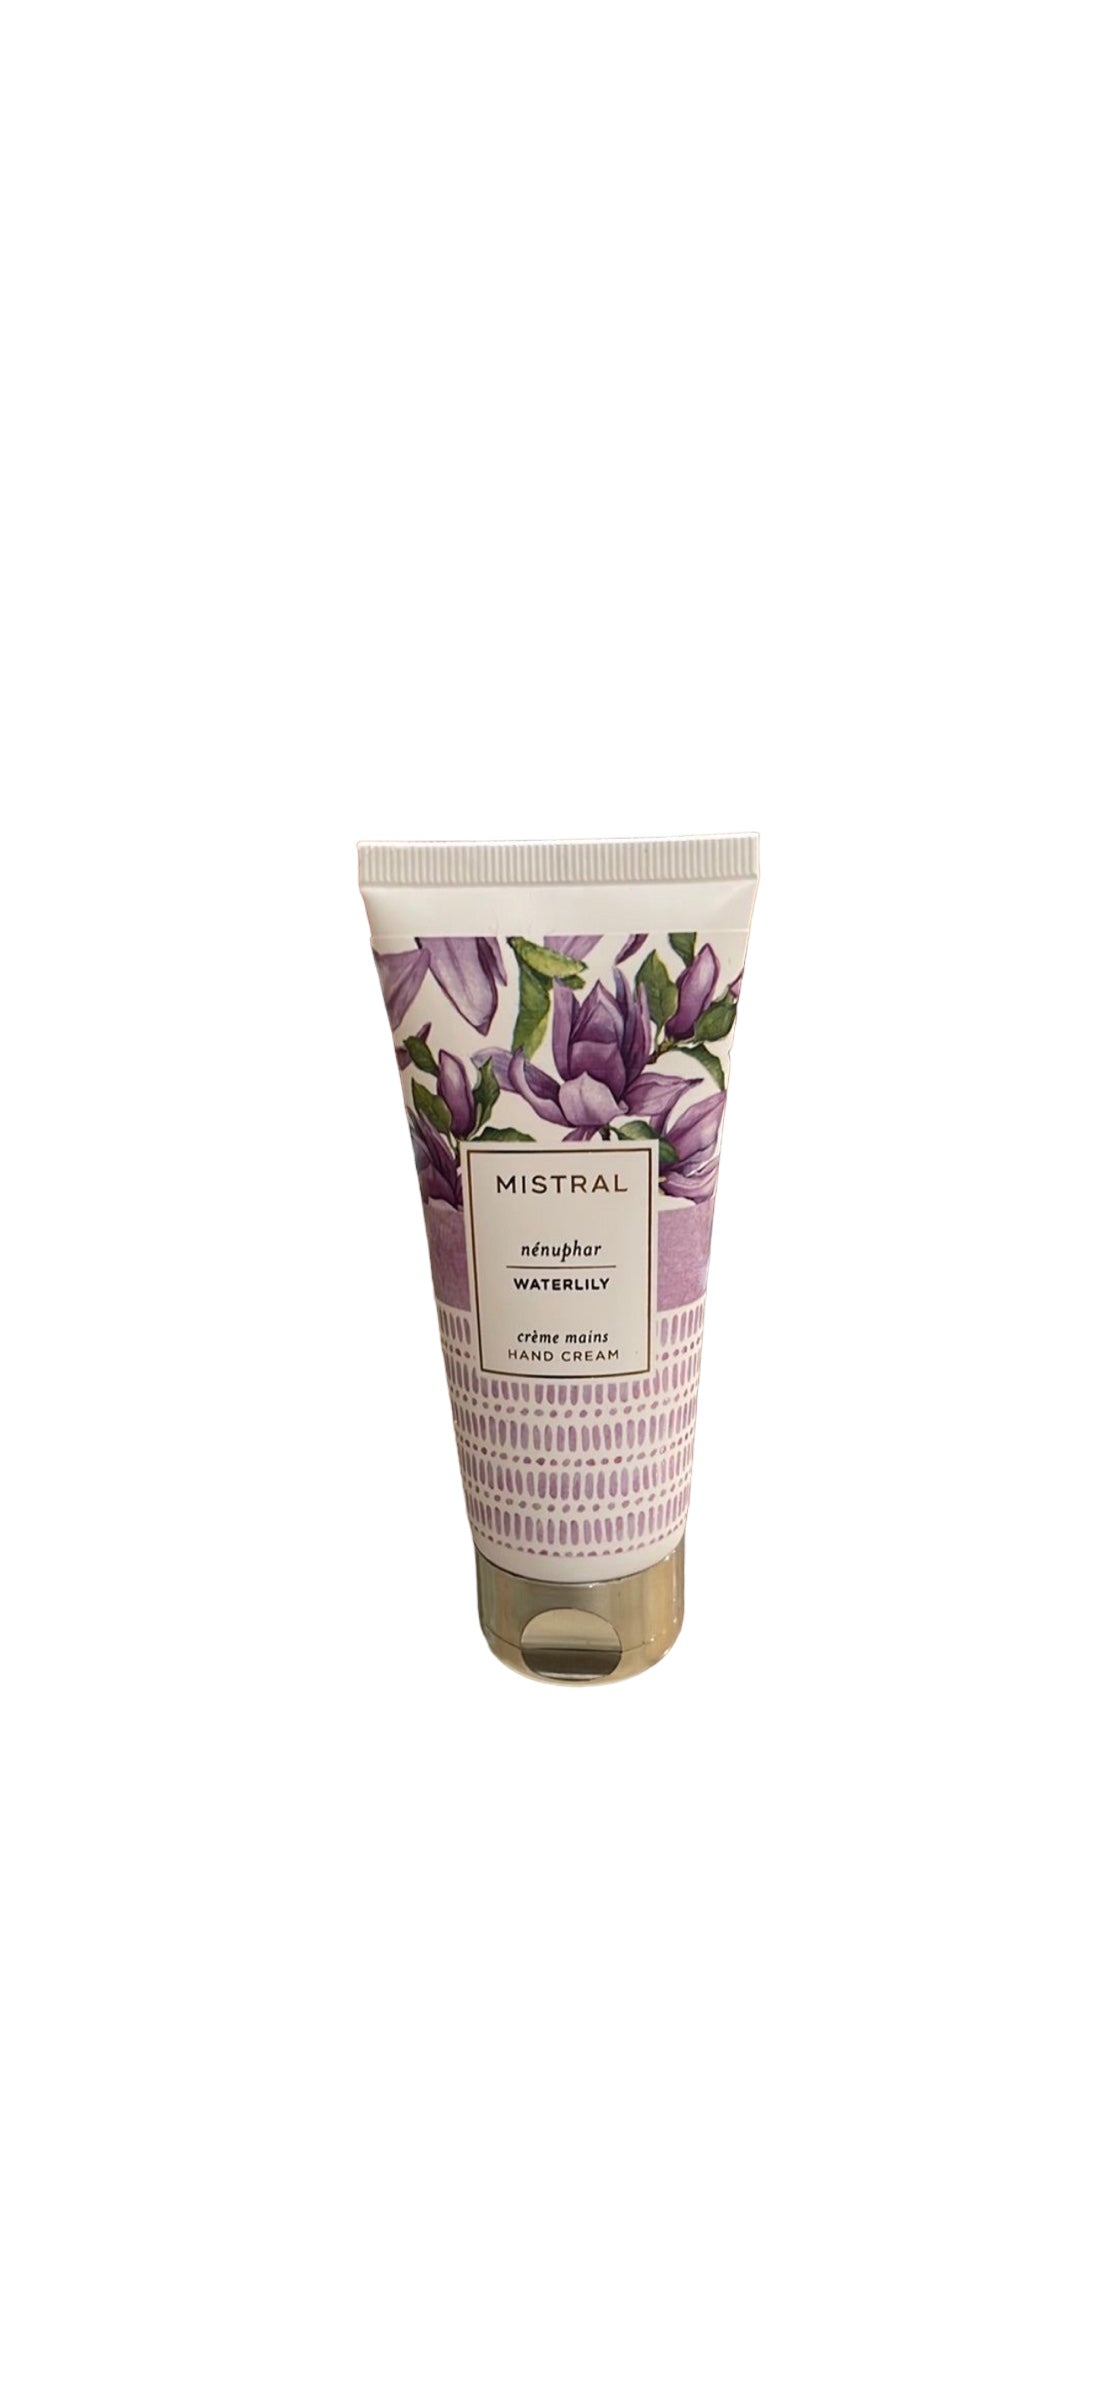 Waterlily Hand Cream by Mistral